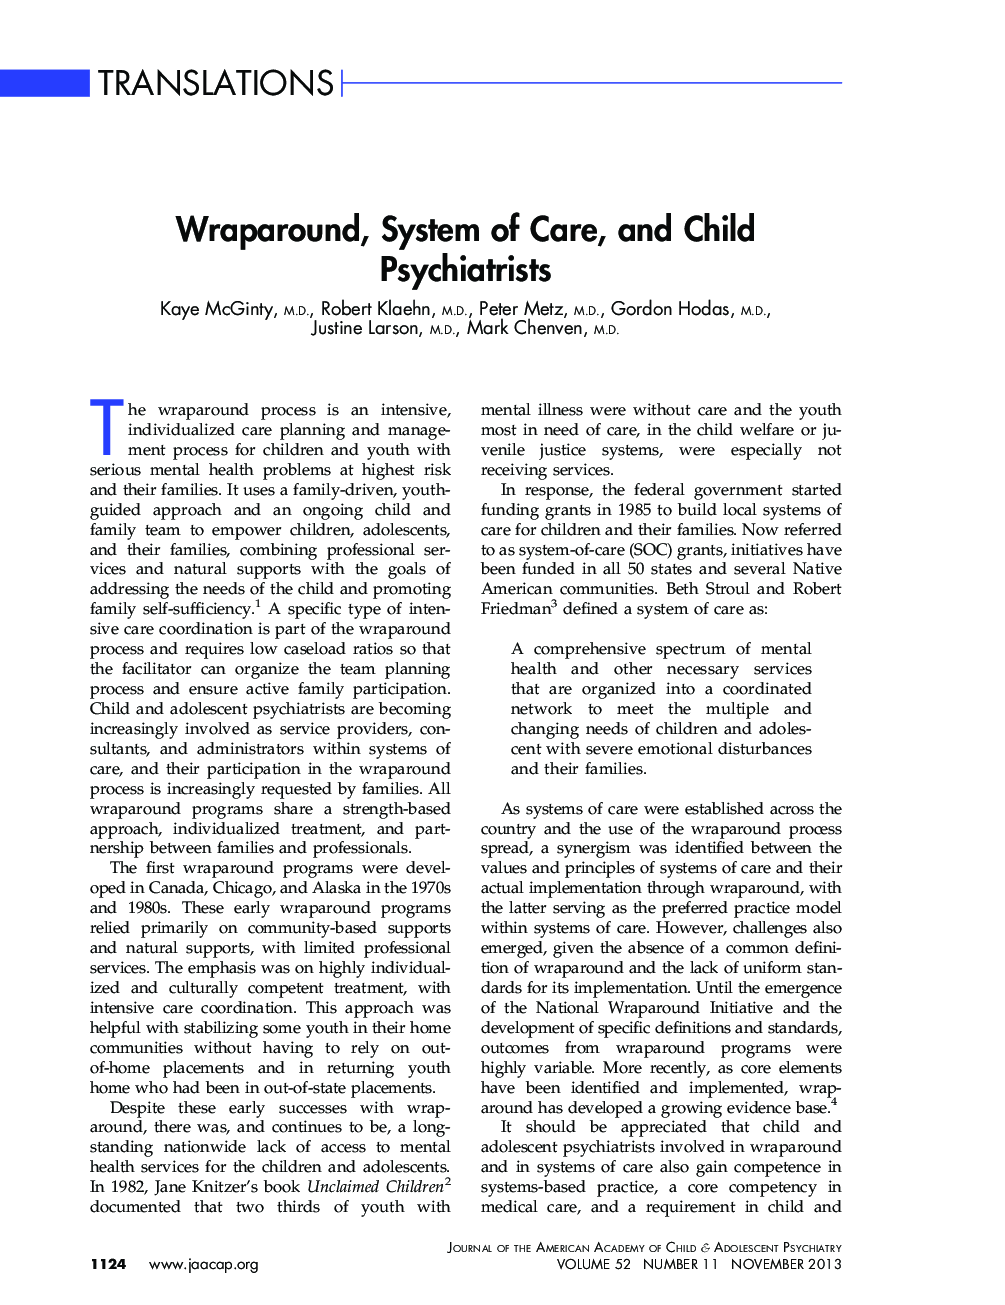 Wraparound, System of Care, and Child Psychiatrists